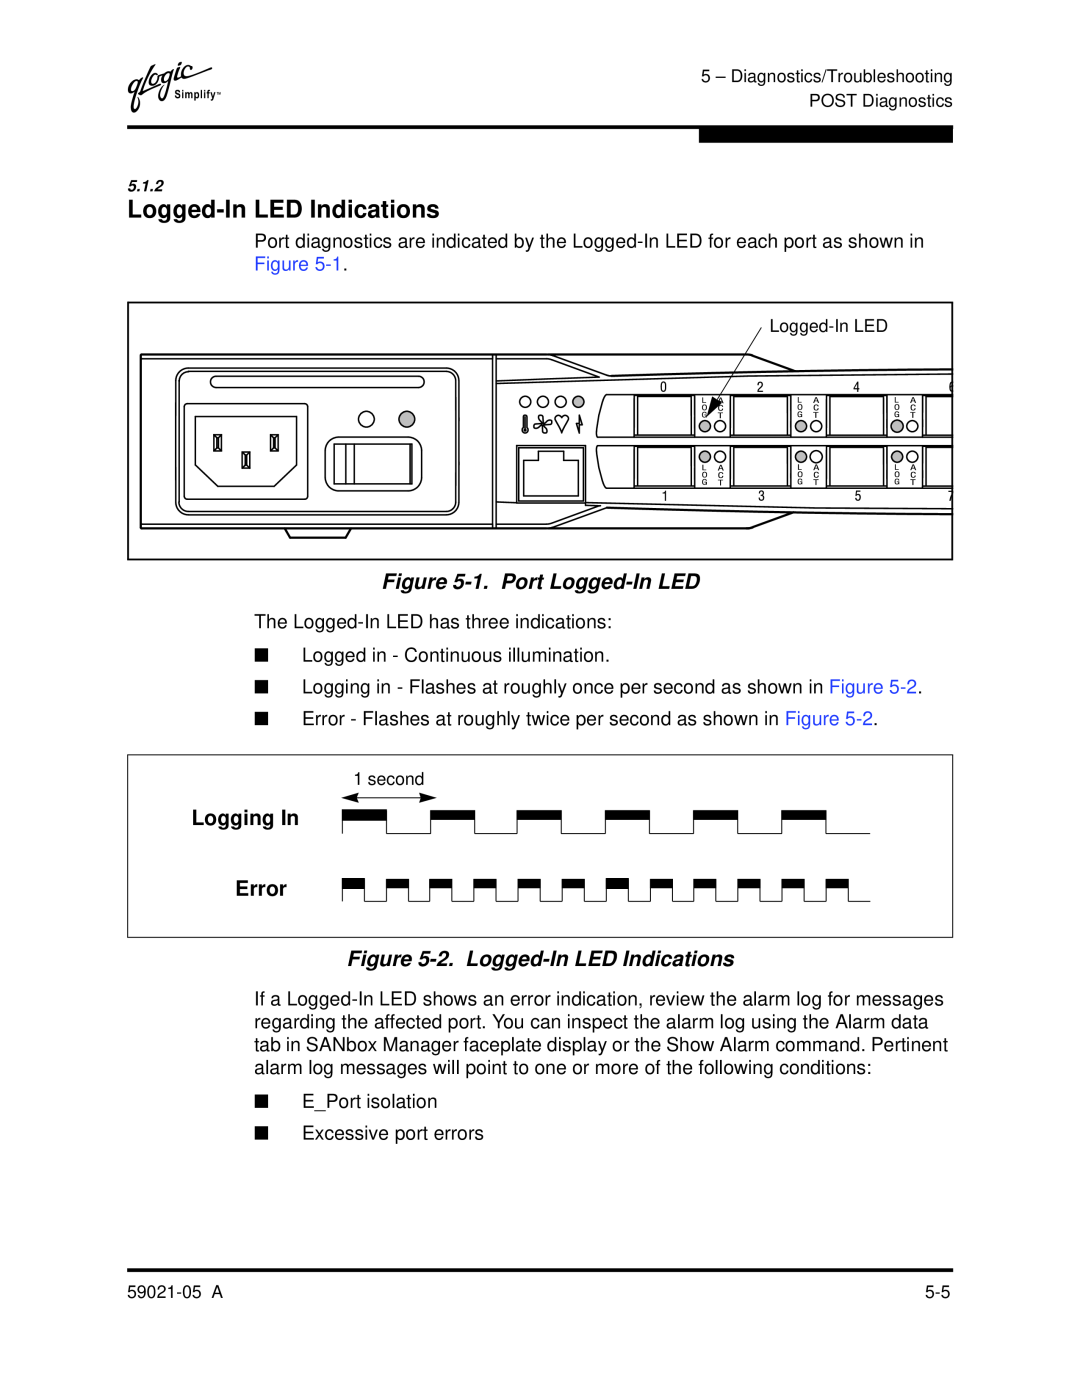 Q-Logic 59021-05 manual 1. Port Logged-In LED, Logging In Error, 2. Logged-In LED Indications 